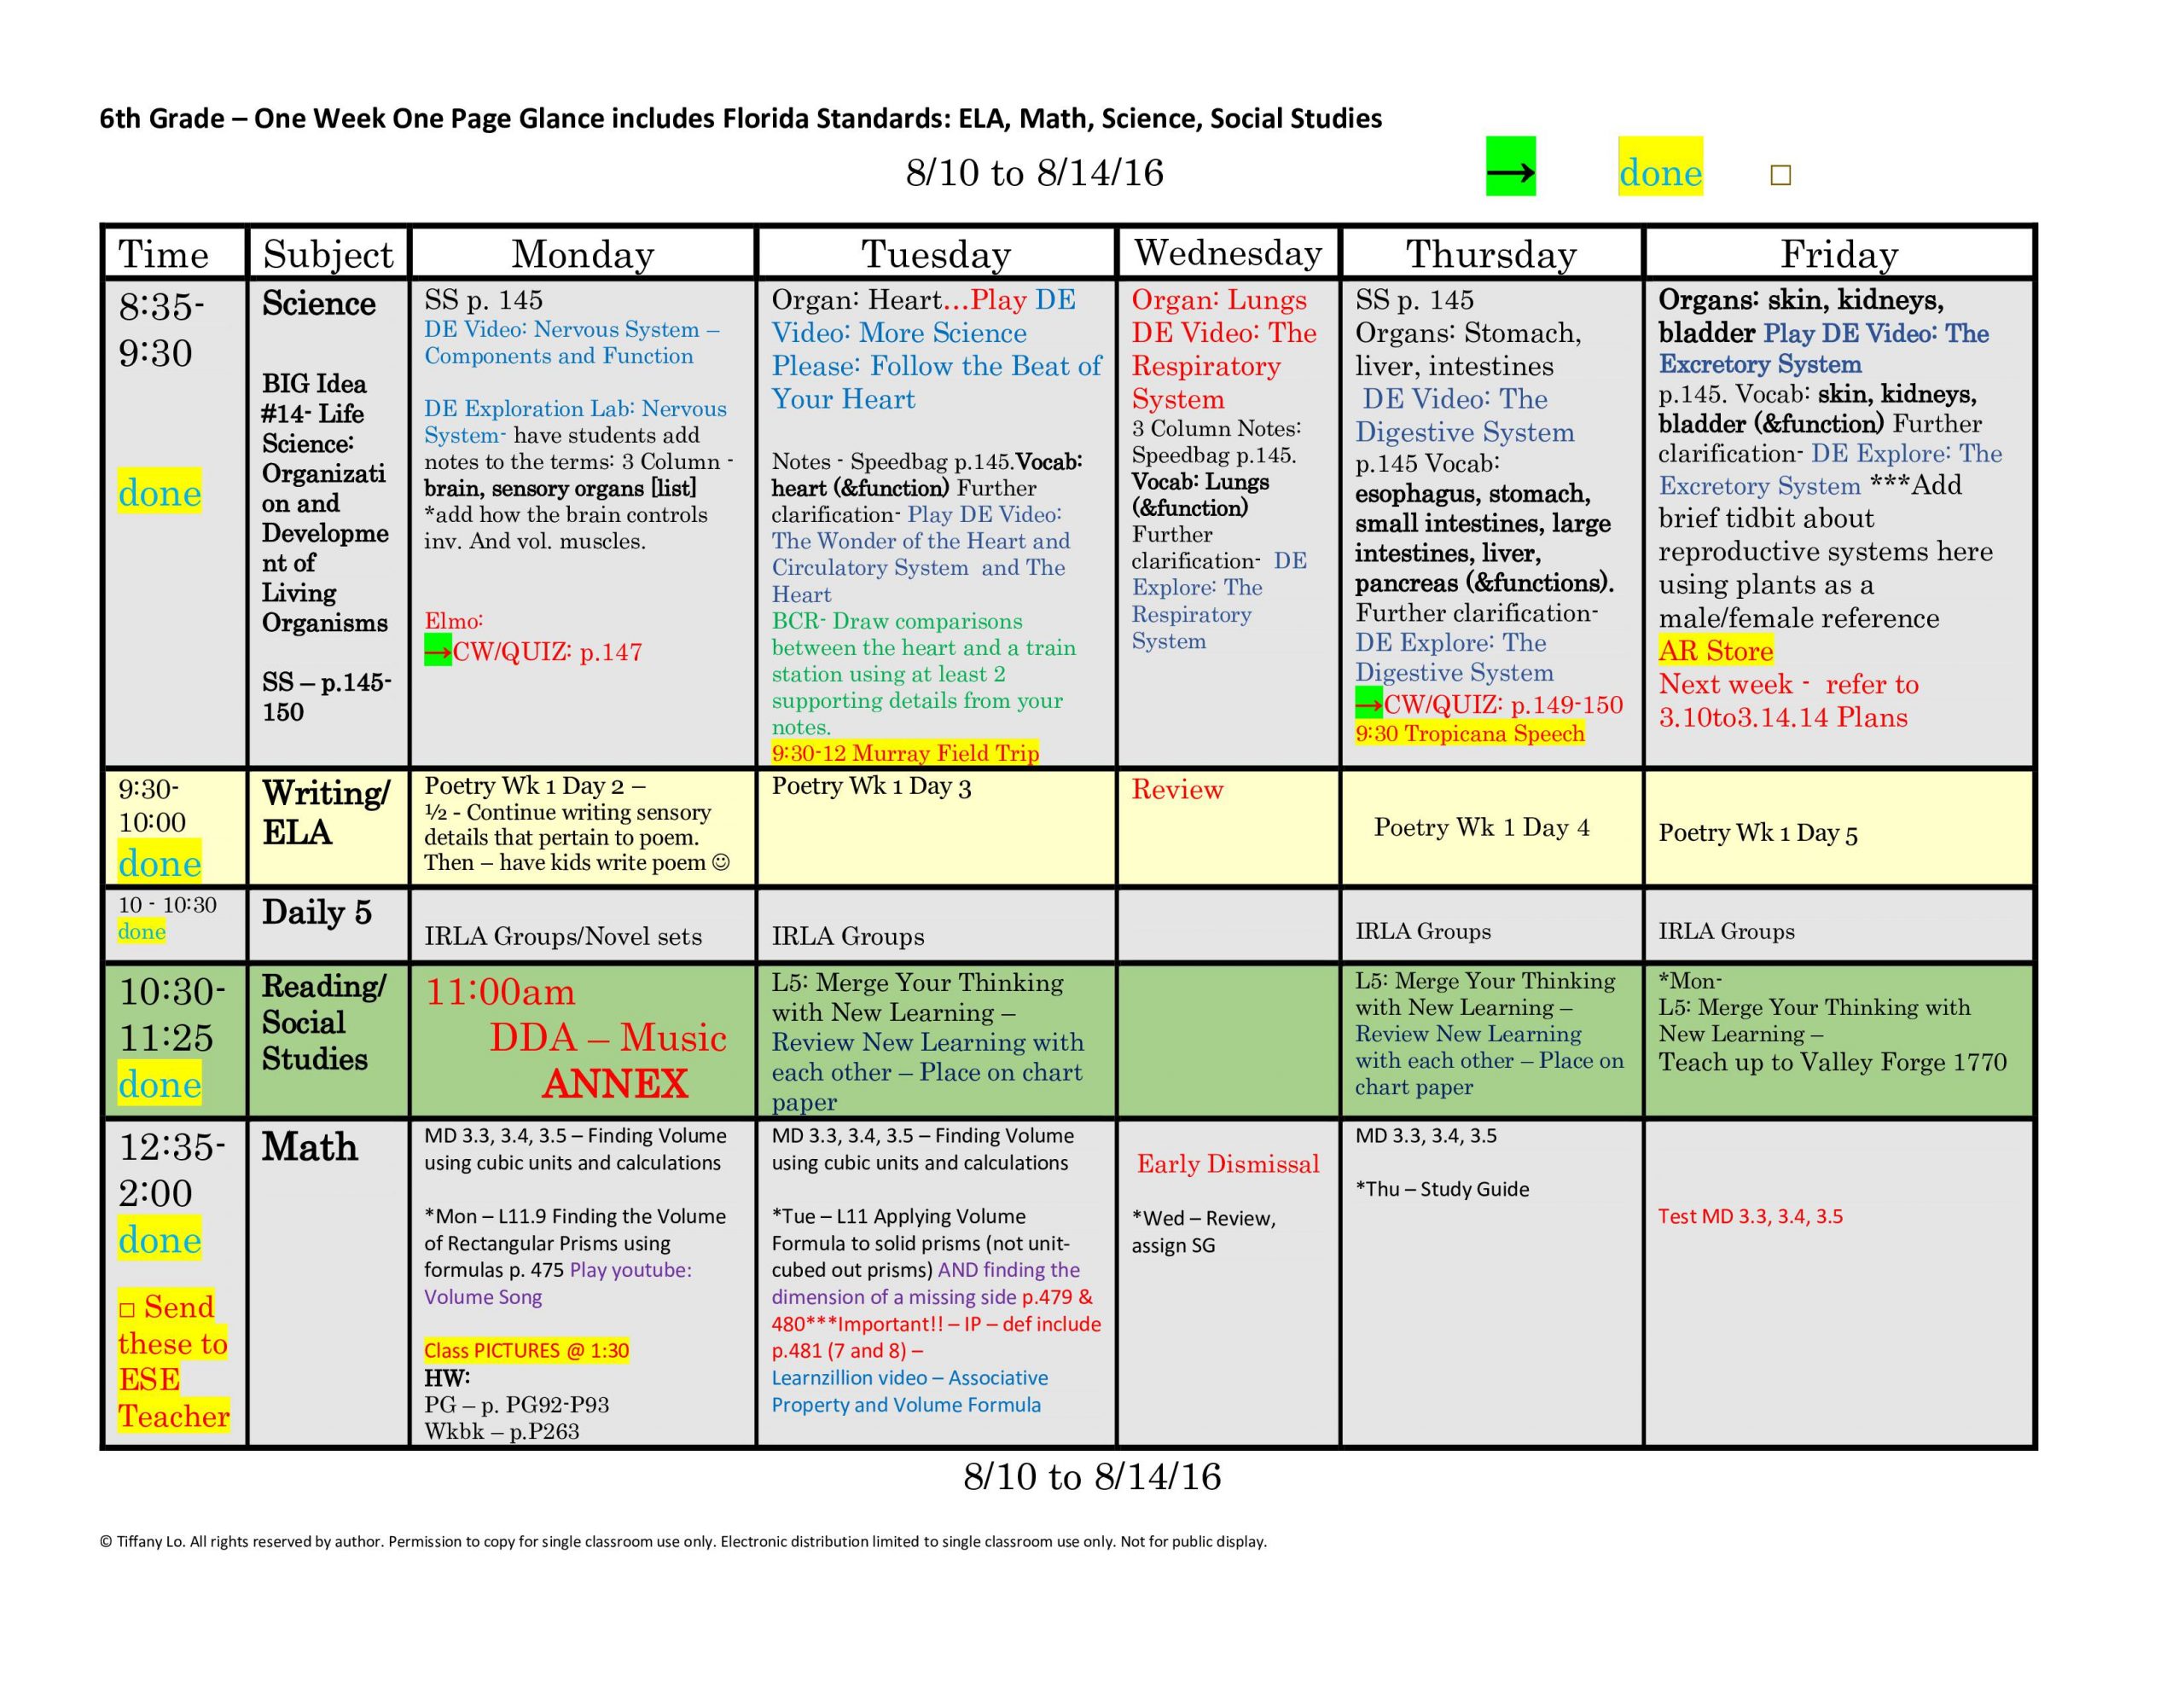 6Th Sixth Grade Florida Standards Weekly Lesson Plan Template: 1 Week 1  Glance